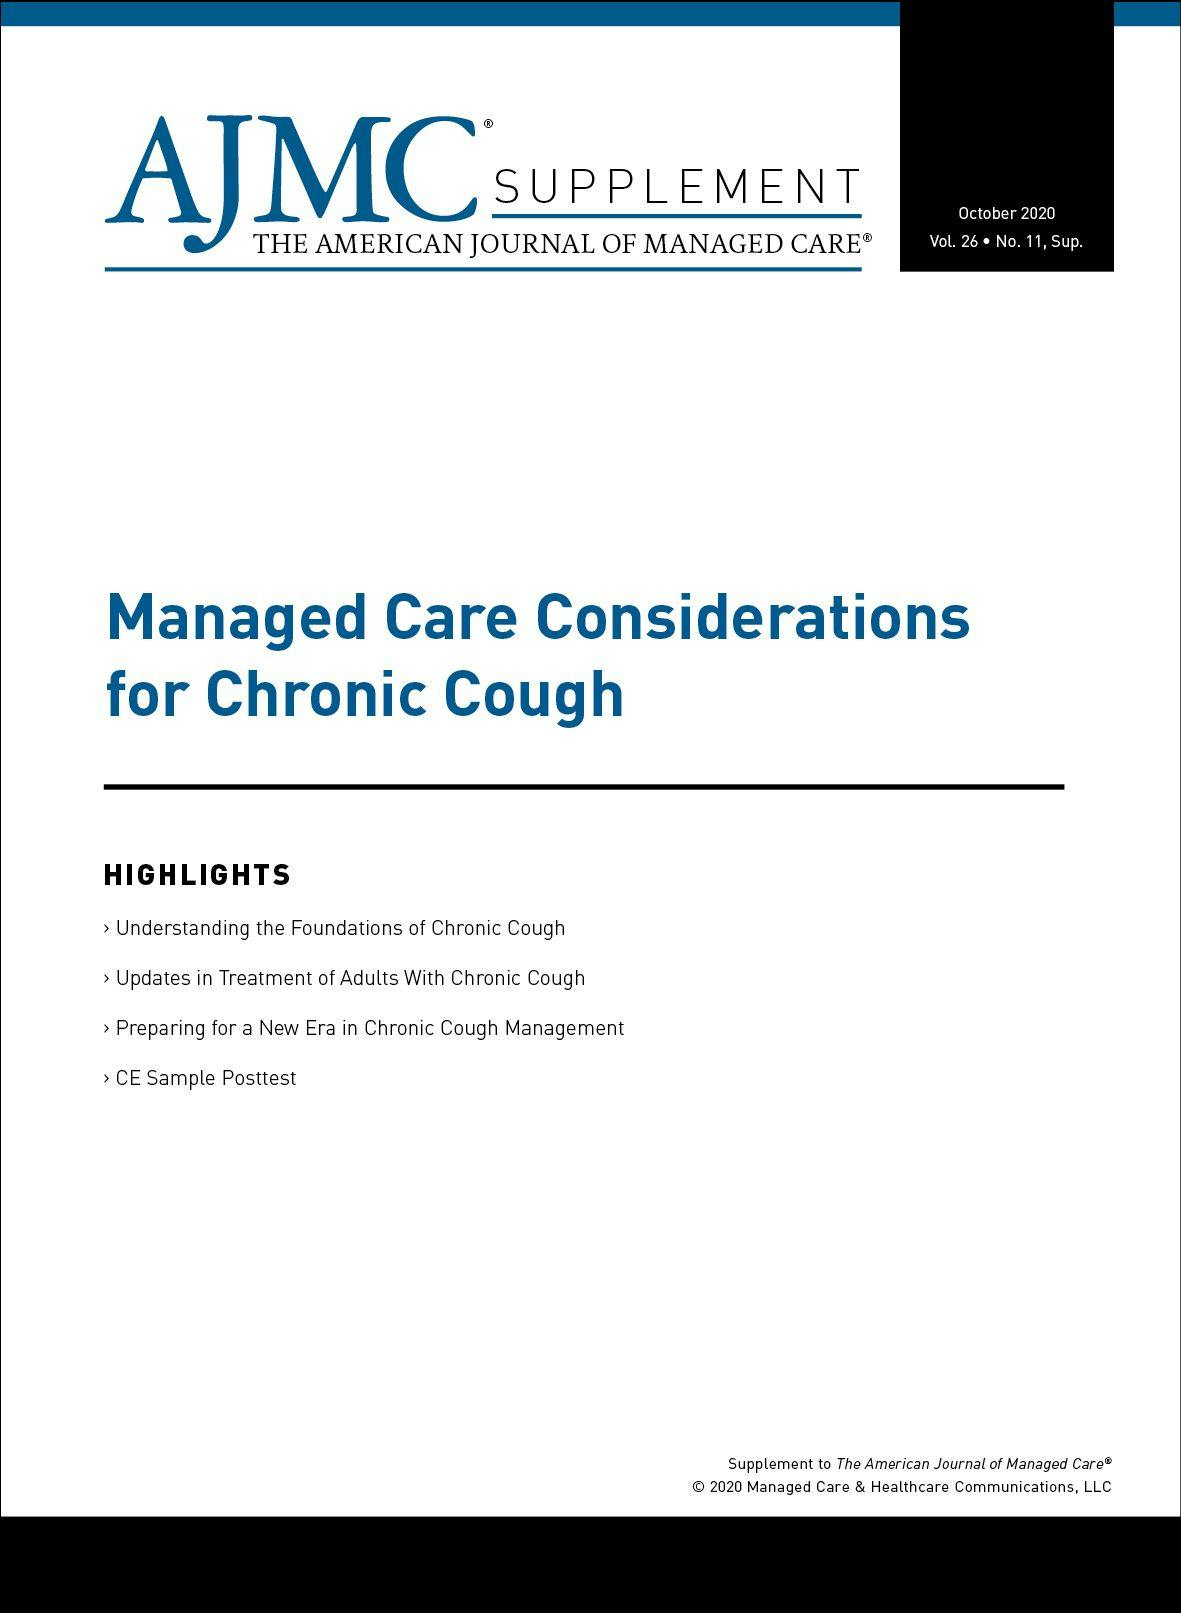 Managed Care Considerations for Chronic Cough